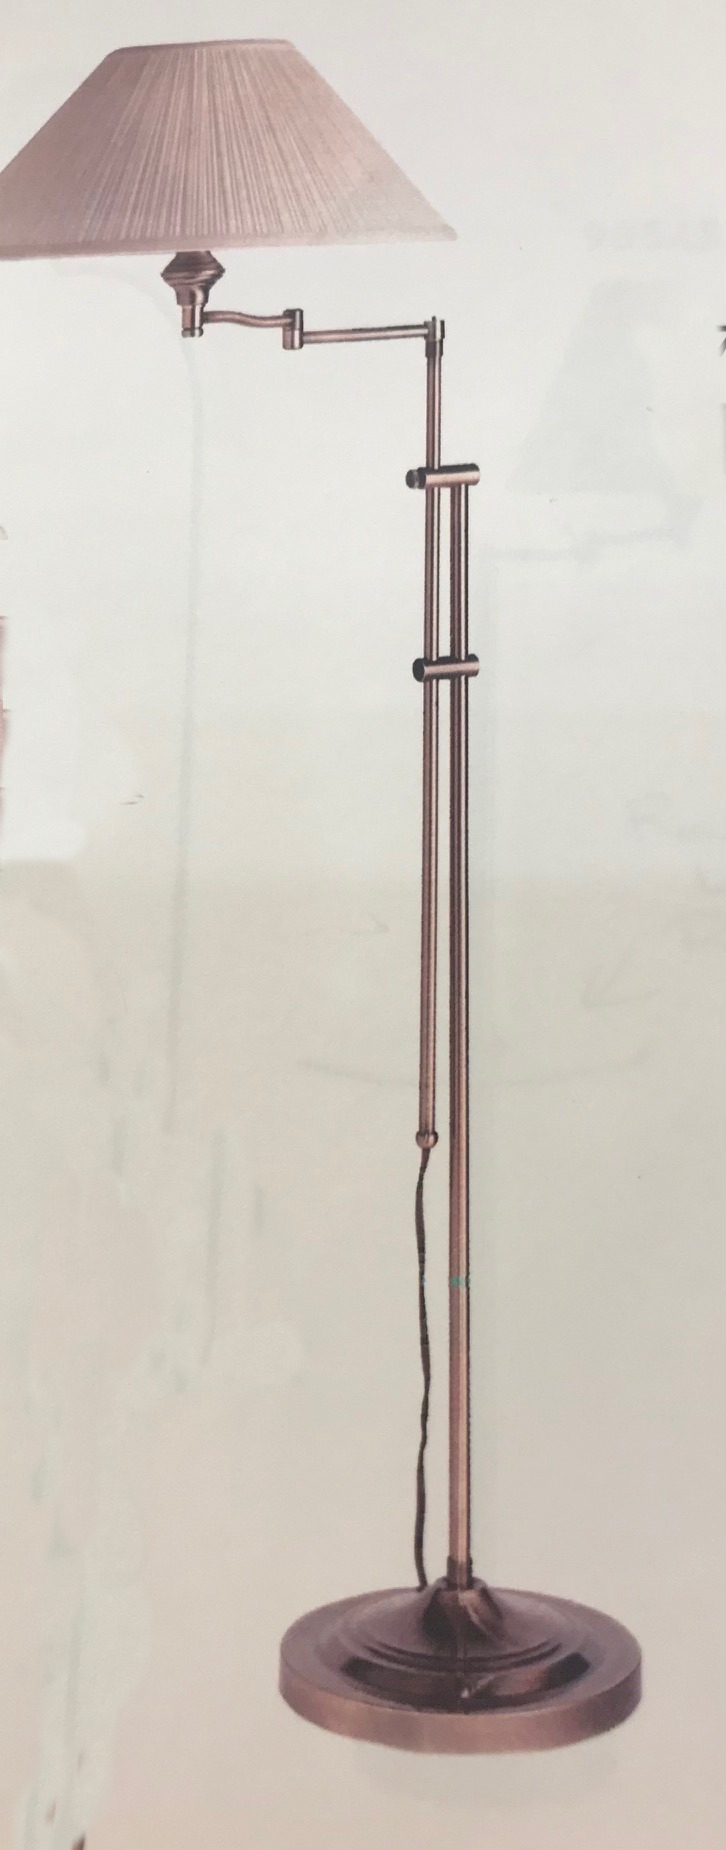 1035 Adj. Swing Arm Floor Lamp
Made in Canada
Available in Antique Brass
or Brushed Chrome
Regular Price $267.99
Sale Price $187.99